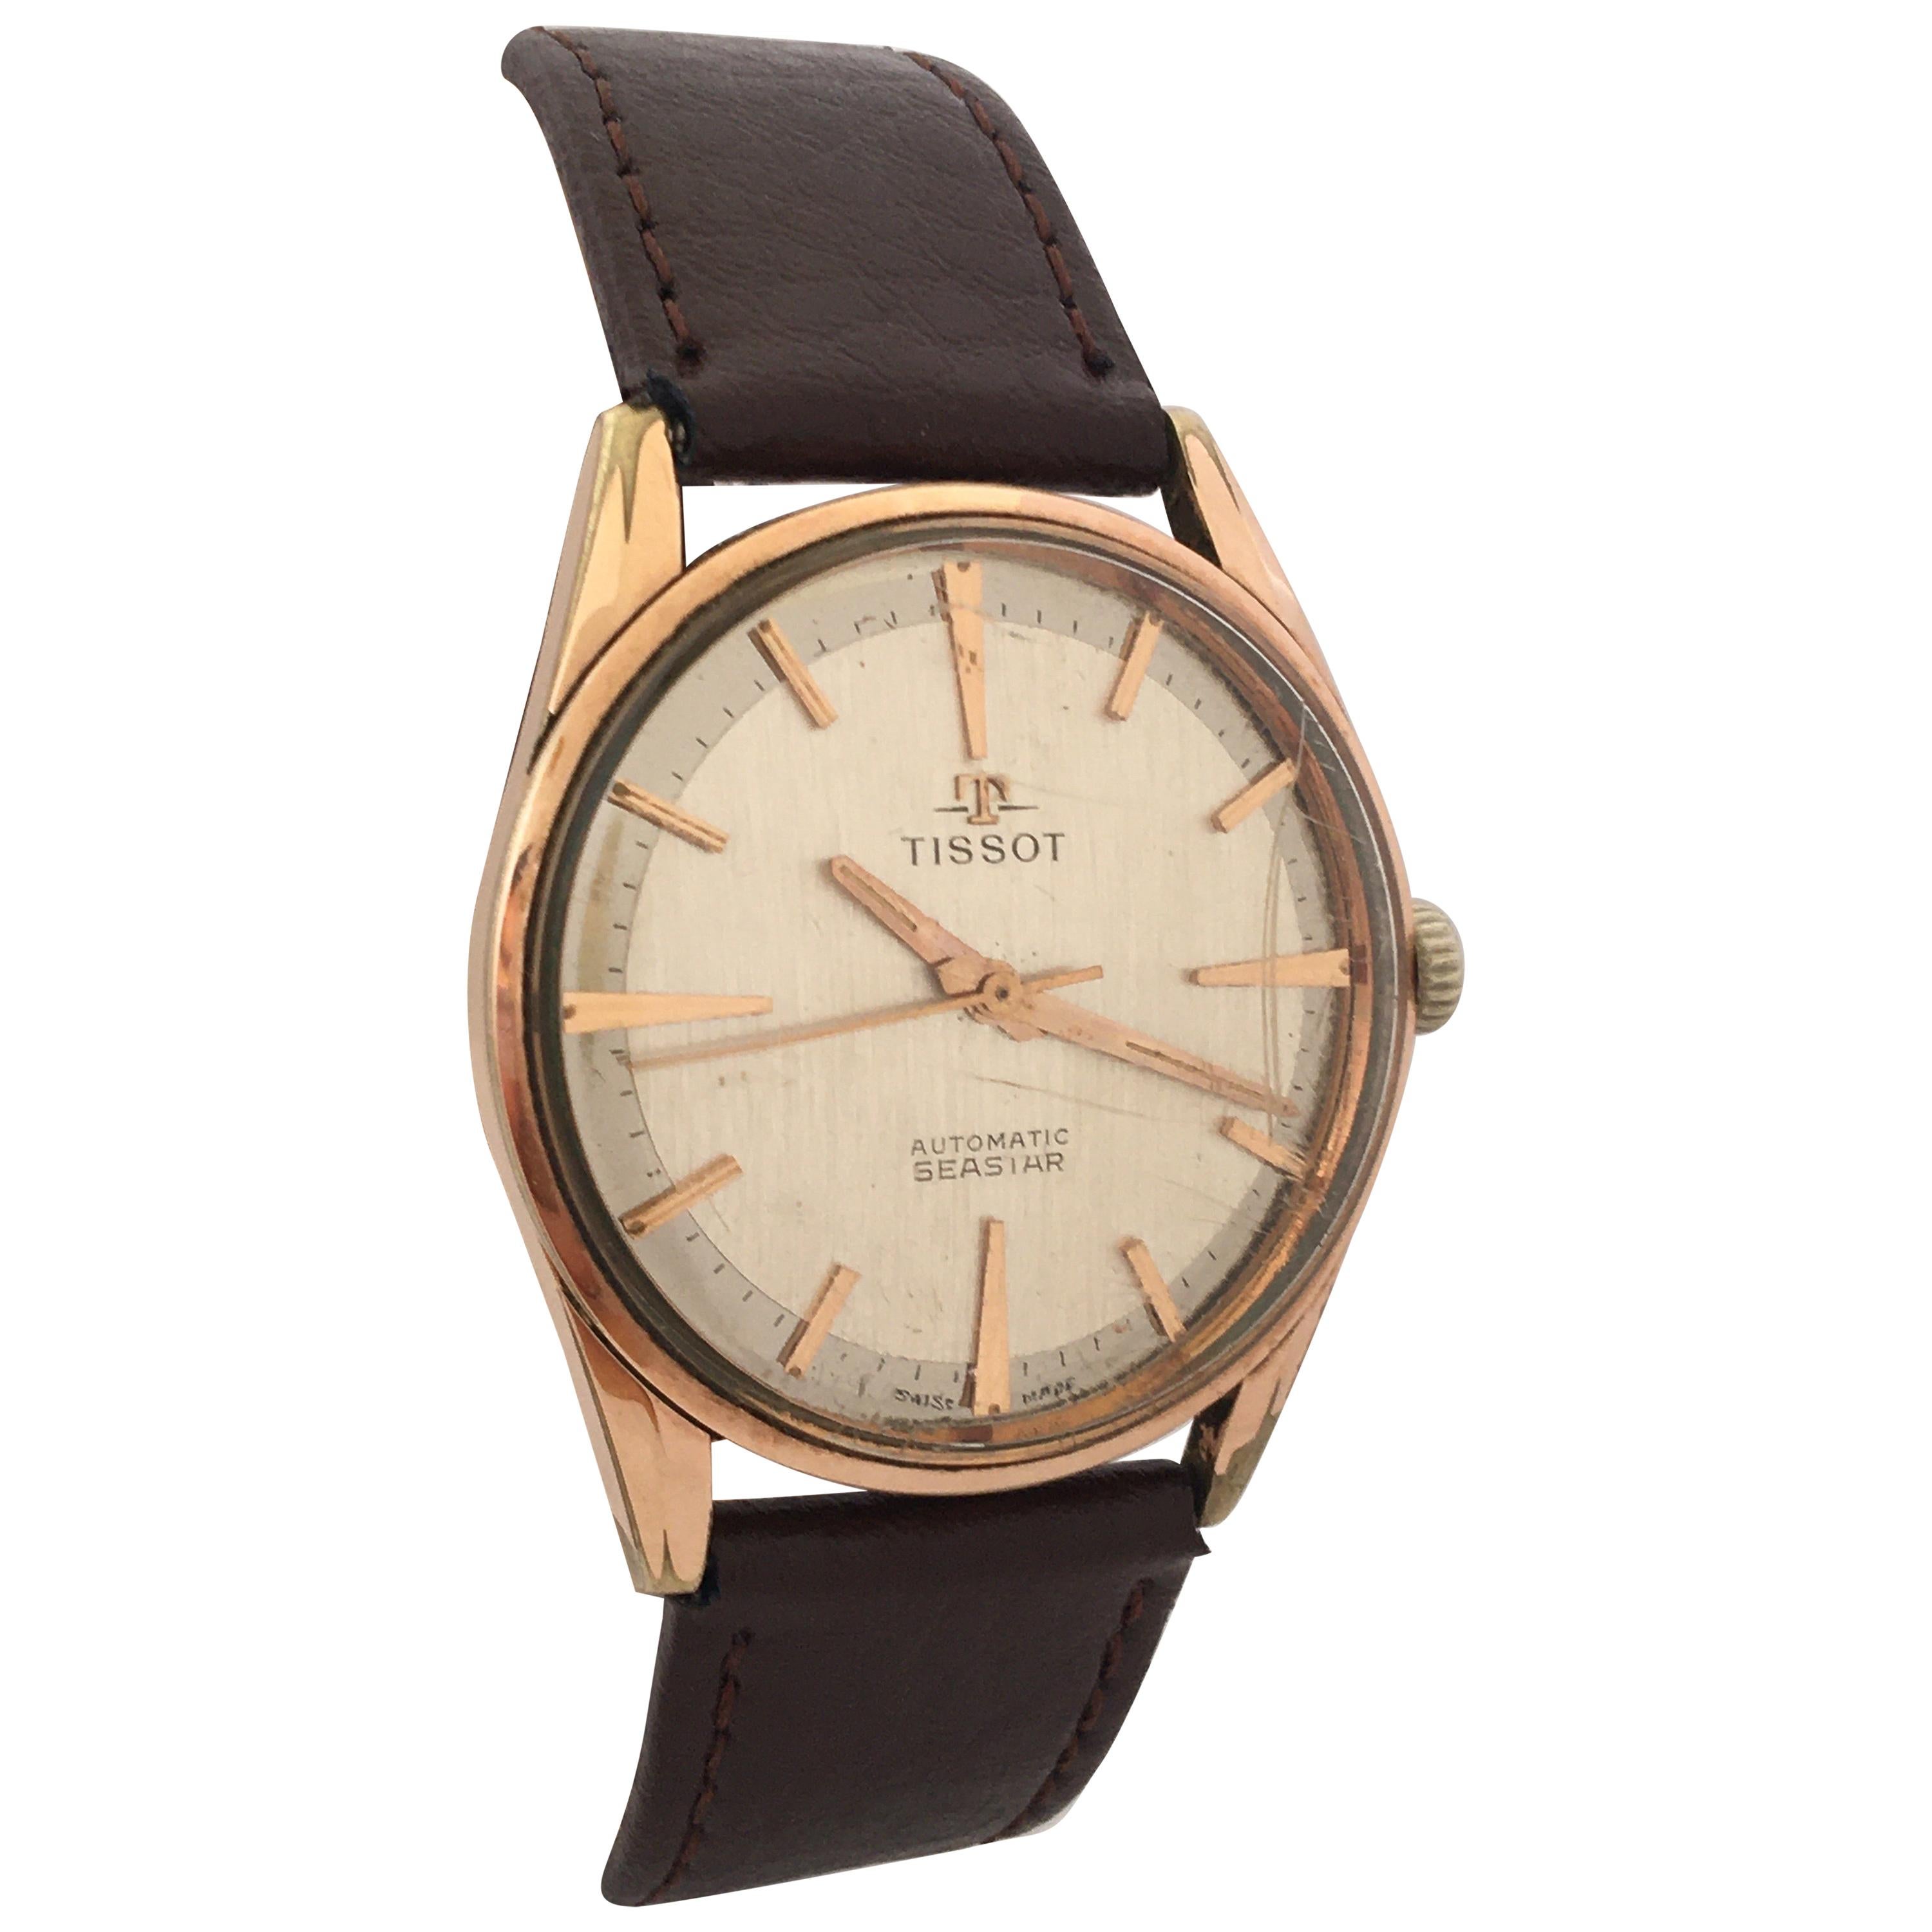 1960s TISSOT Automatic Seastar Gold-Plated Vintage Watch For Sale